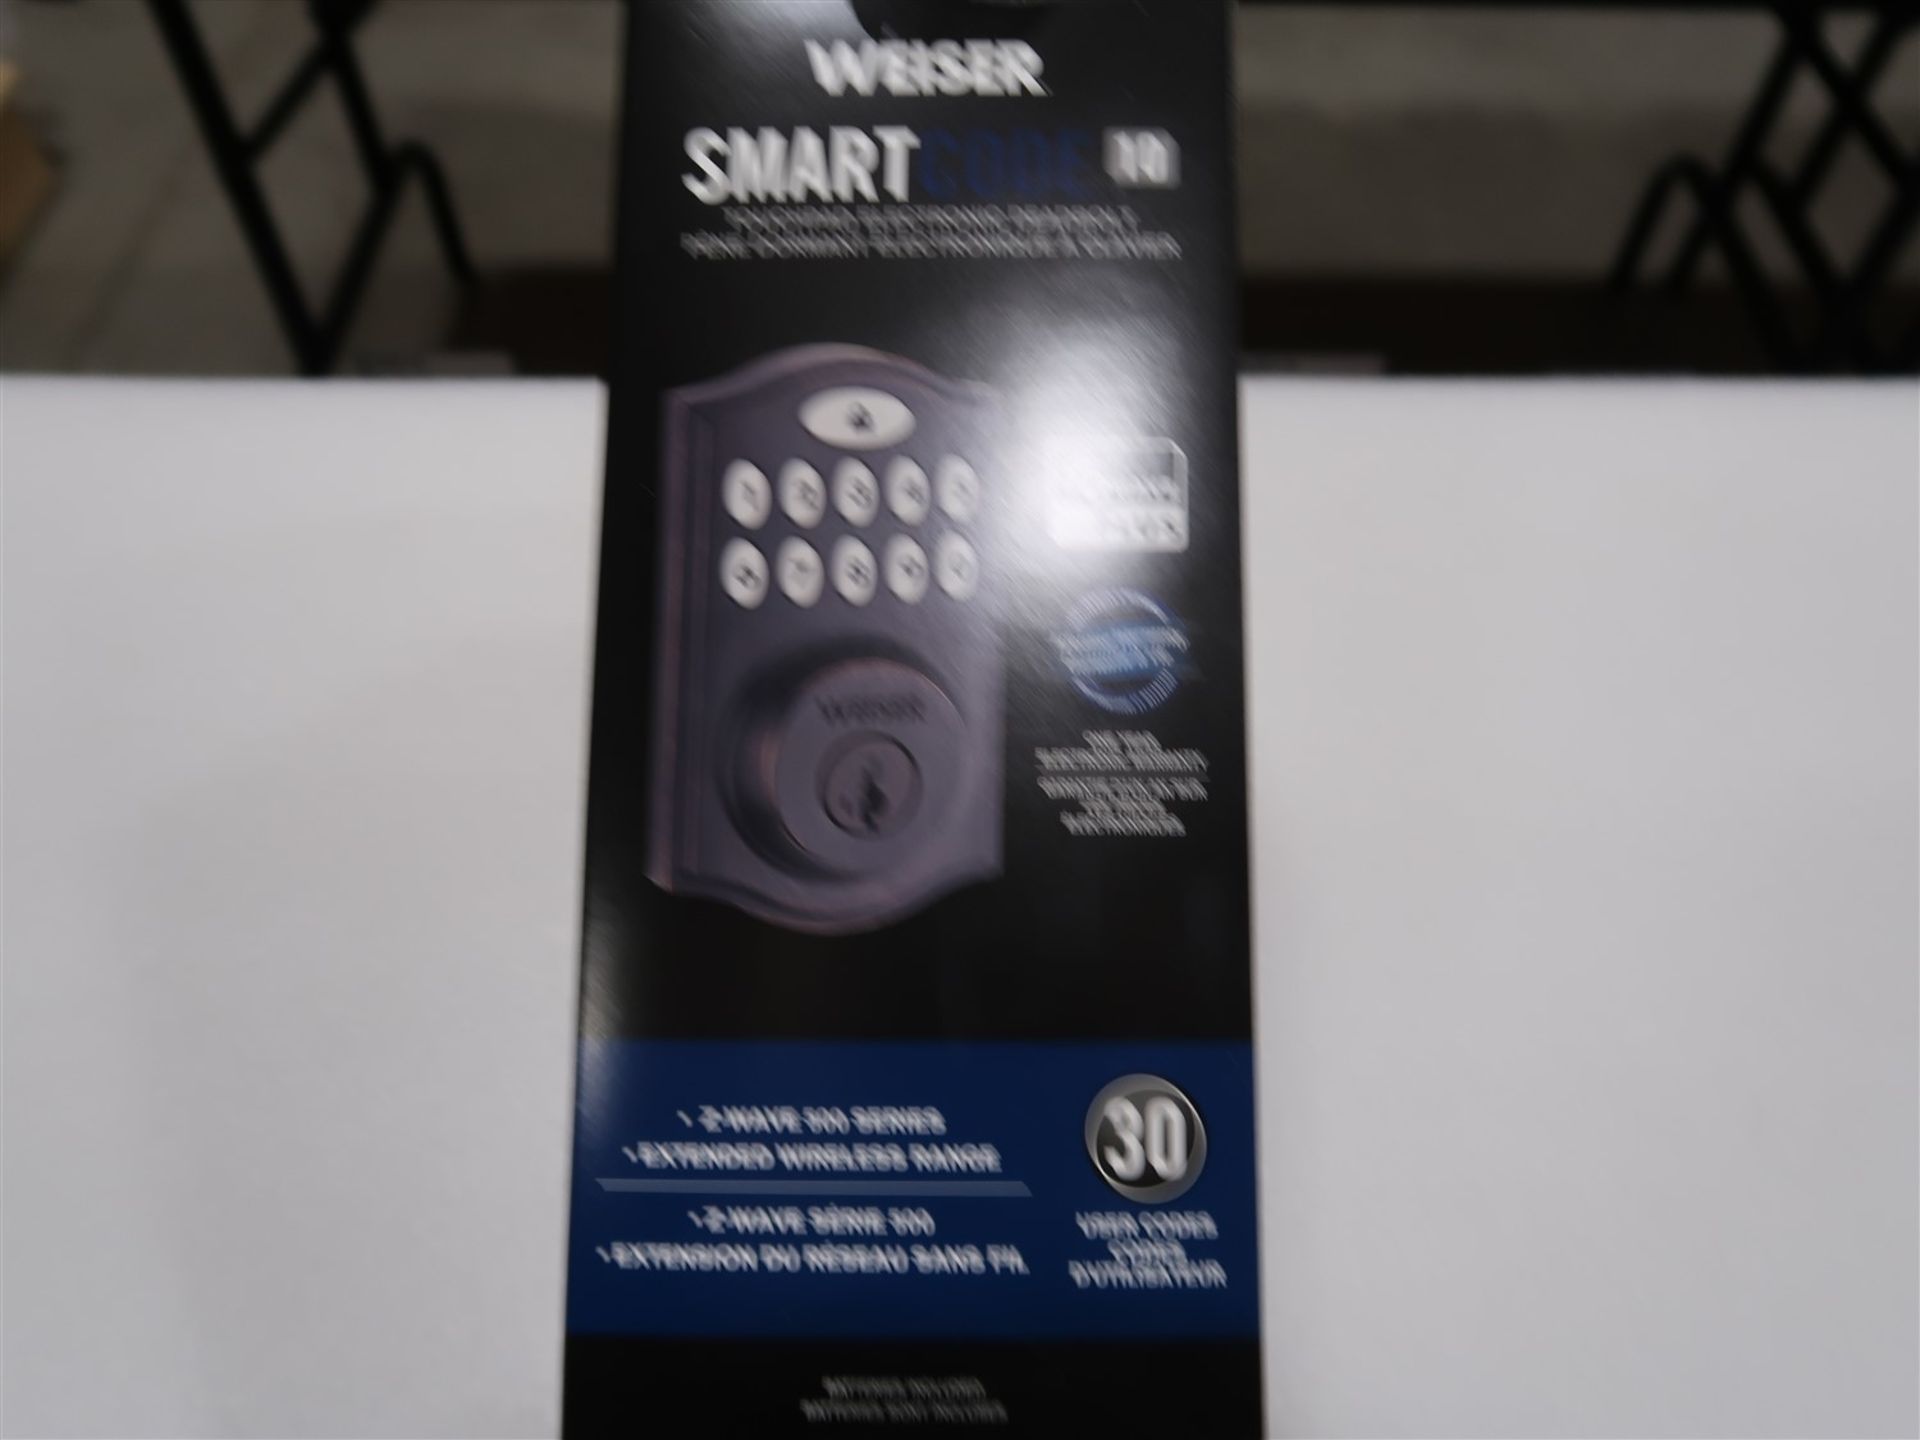 WEISER SMART CODE 10 TOUCH PAD 10 ELECTRONIC DEAD BOLT 9GED 18000-017, (BNIB) - Image 2 of 3